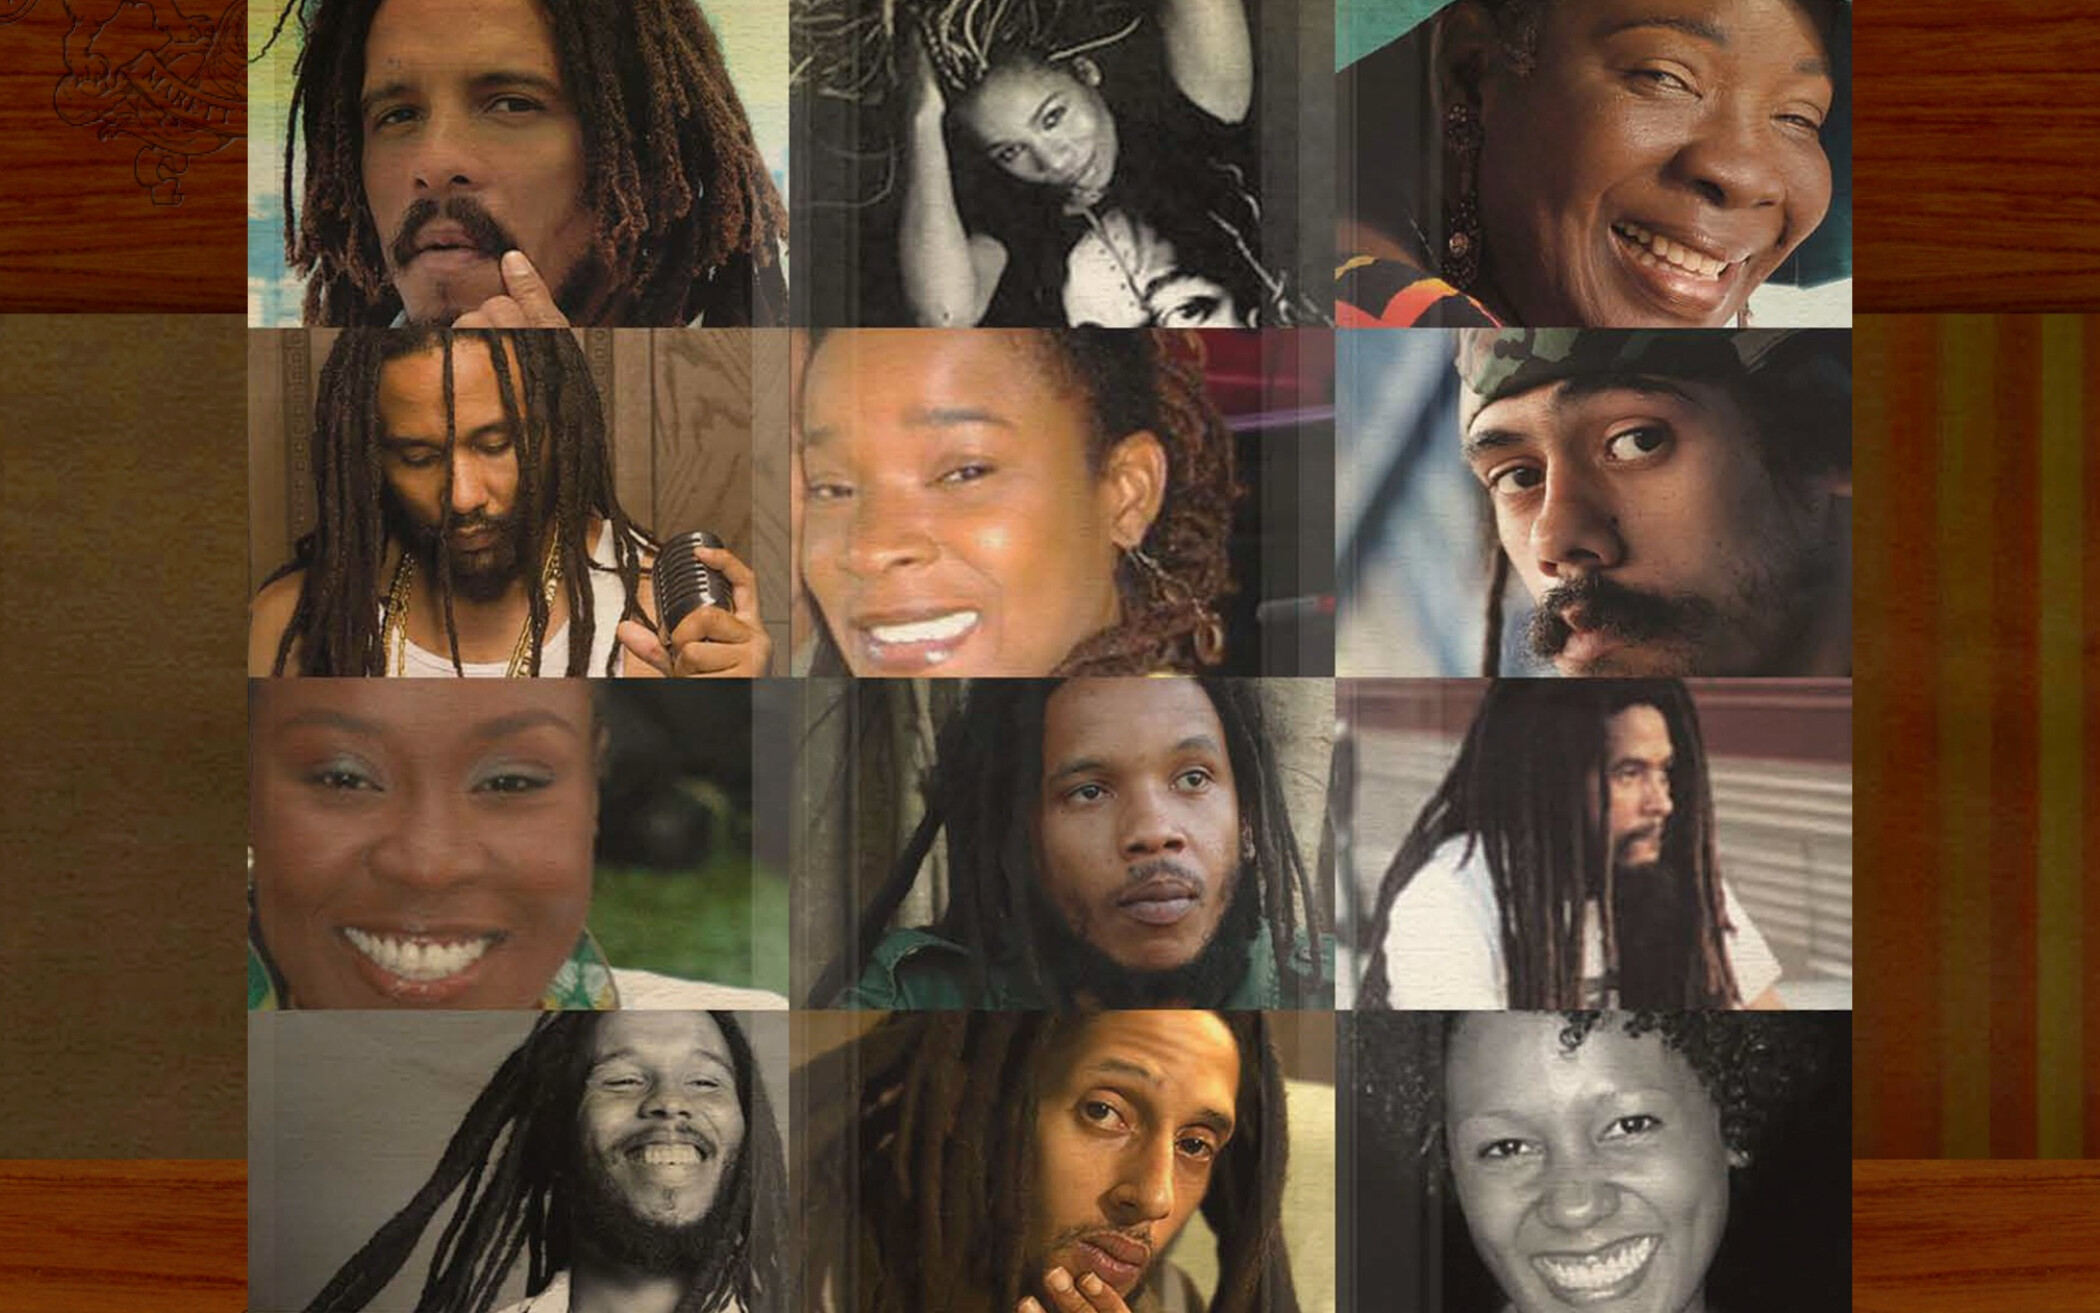 Collage of the Marley family and owners of House of Marley.